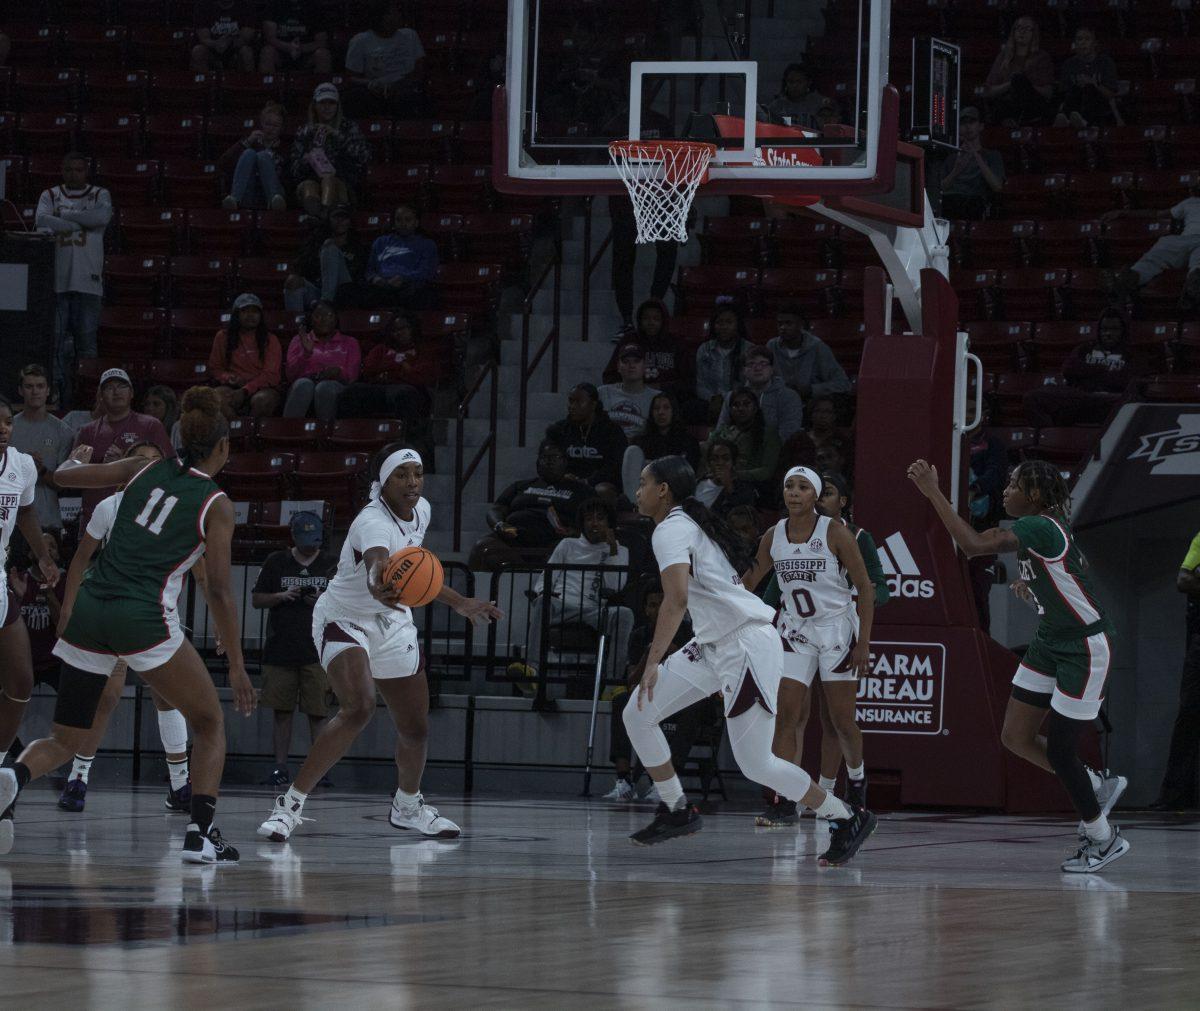 MSU will play Creighton in their first matchup in the round of 64 Friday at 5 p.m.